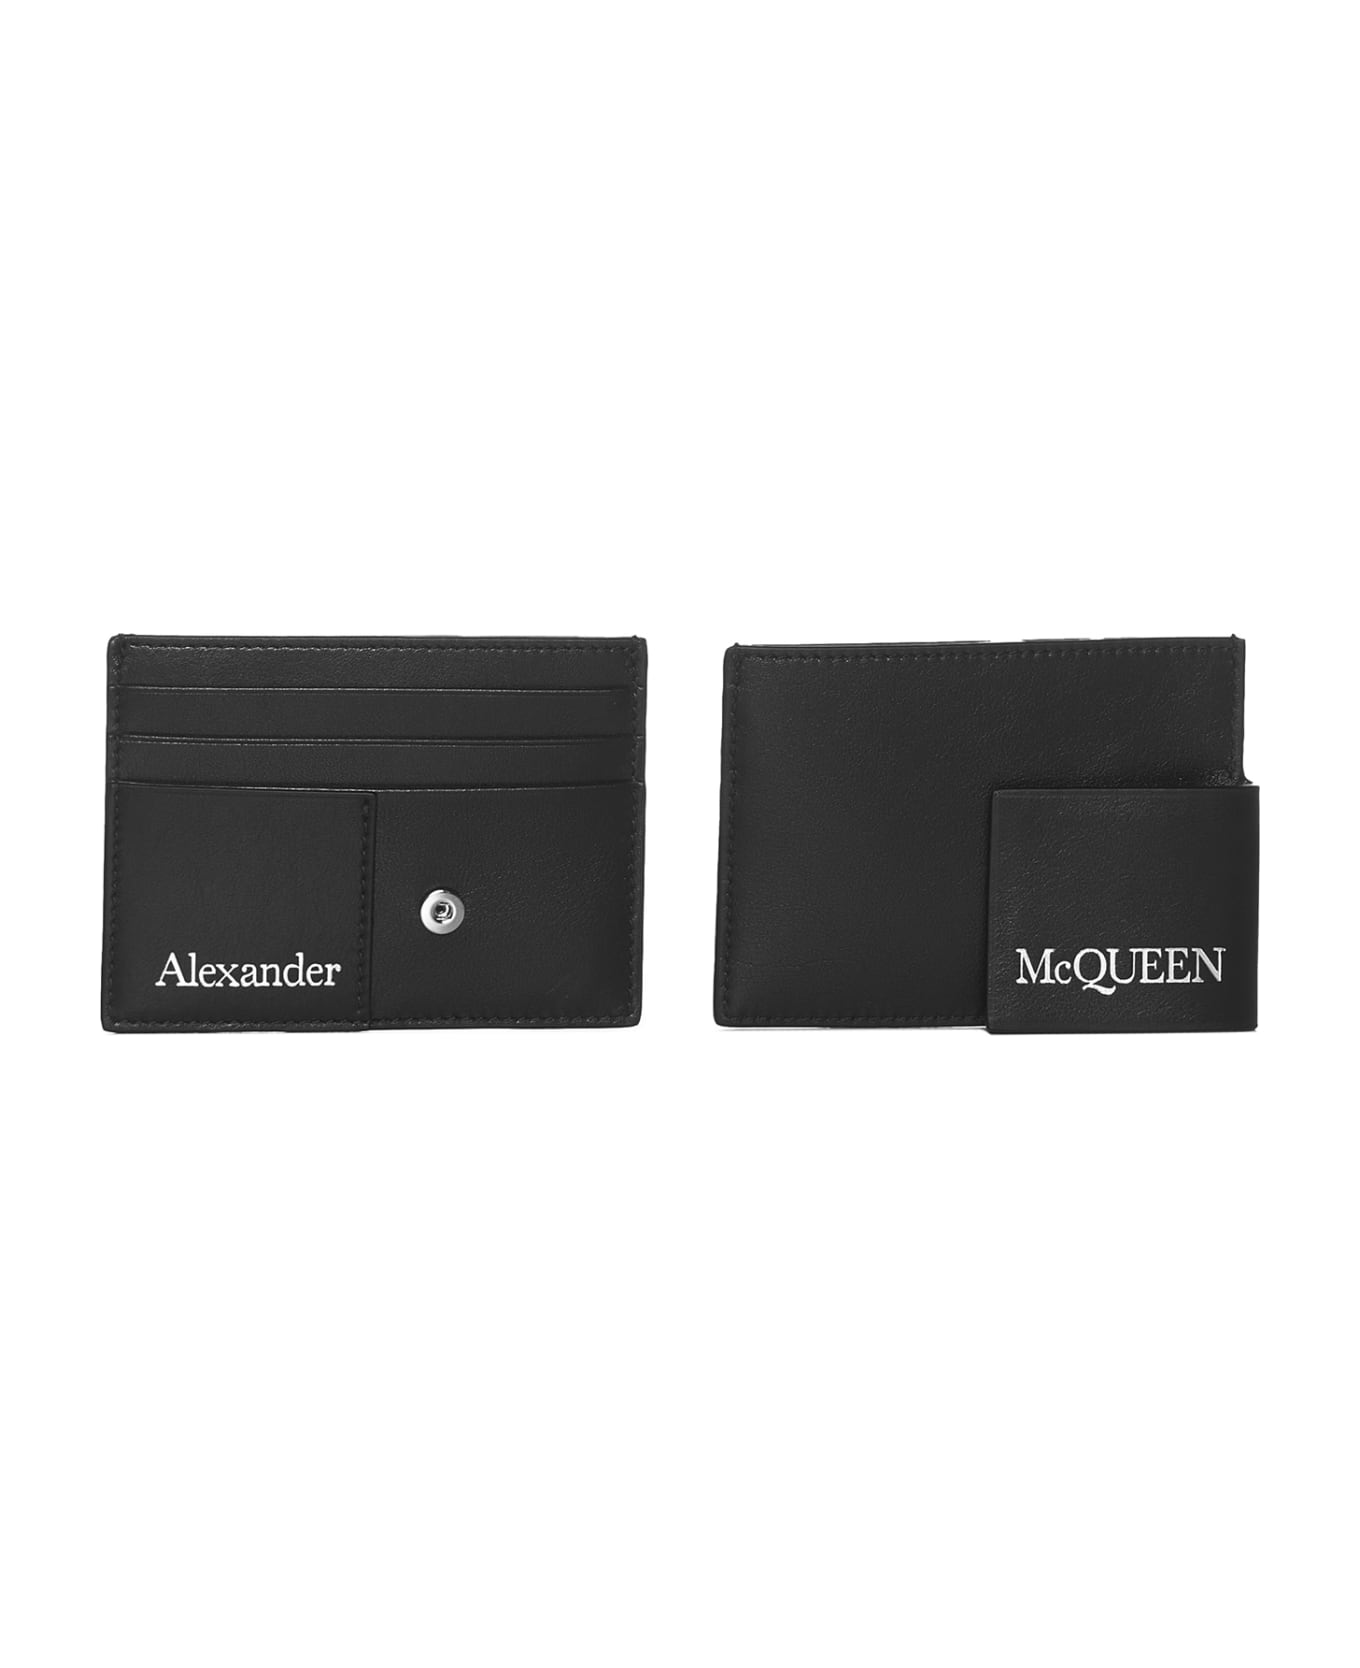 Alexander McQueen Double Card Holder In Black Leather With Logo - Nero